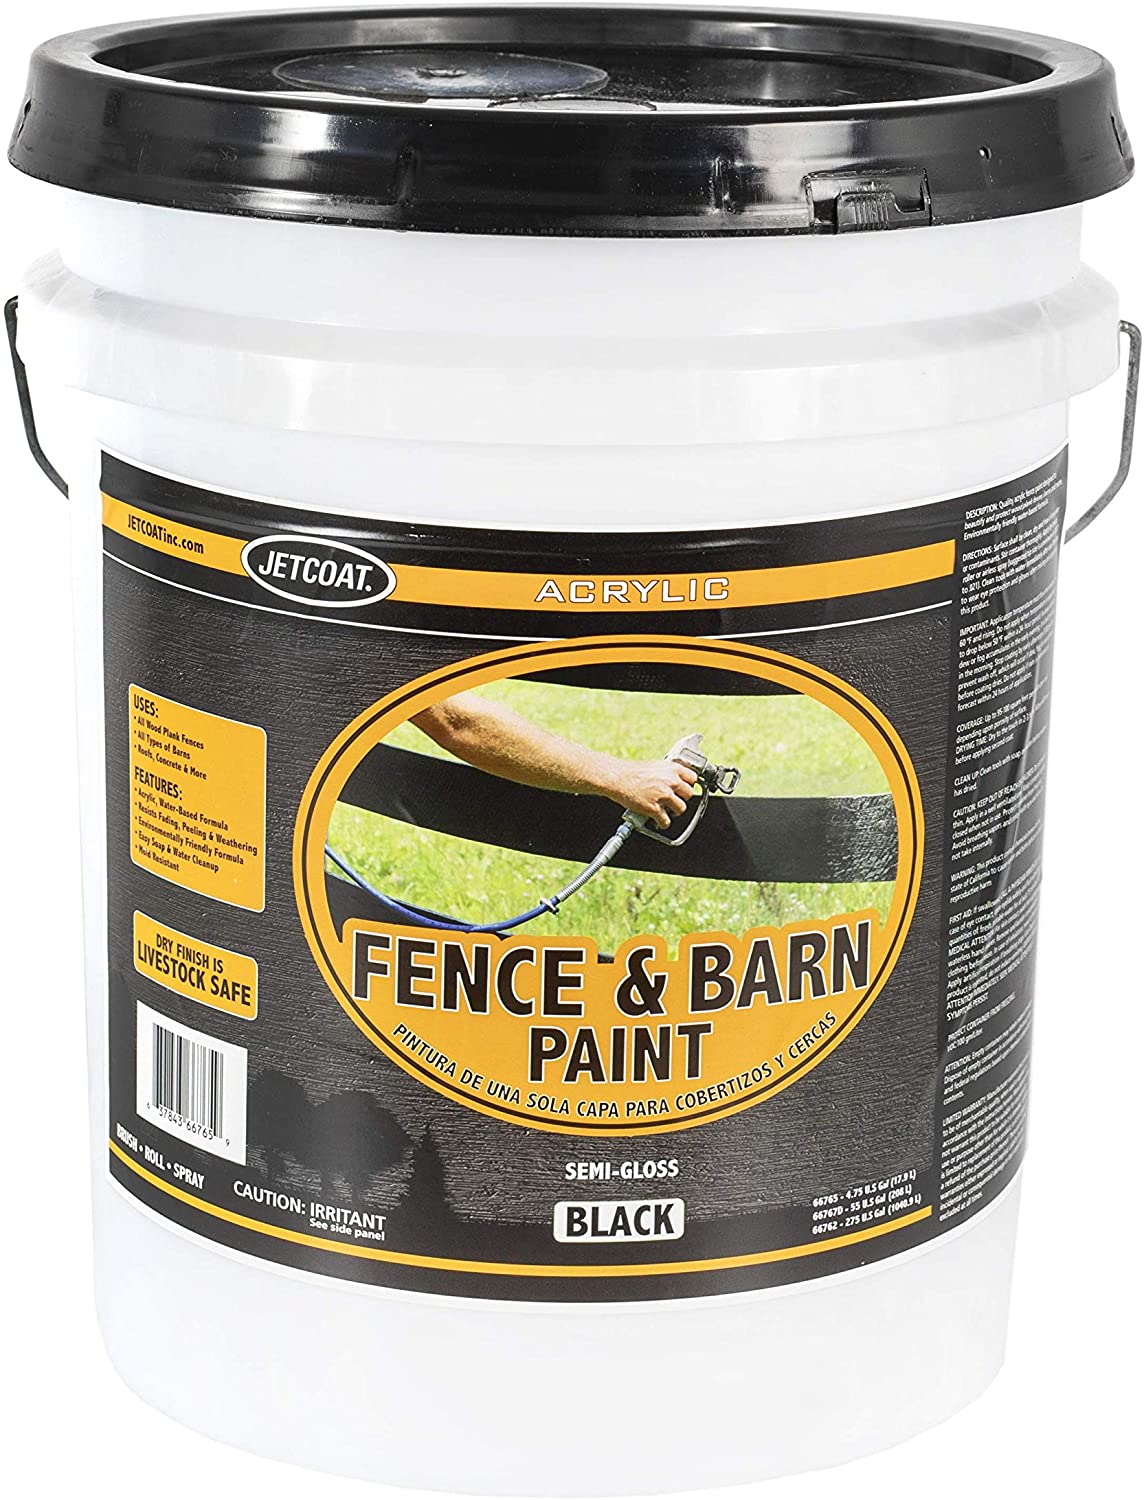 <strong>9. Jetcoat Pride Acrylic Fence Paint</strong>